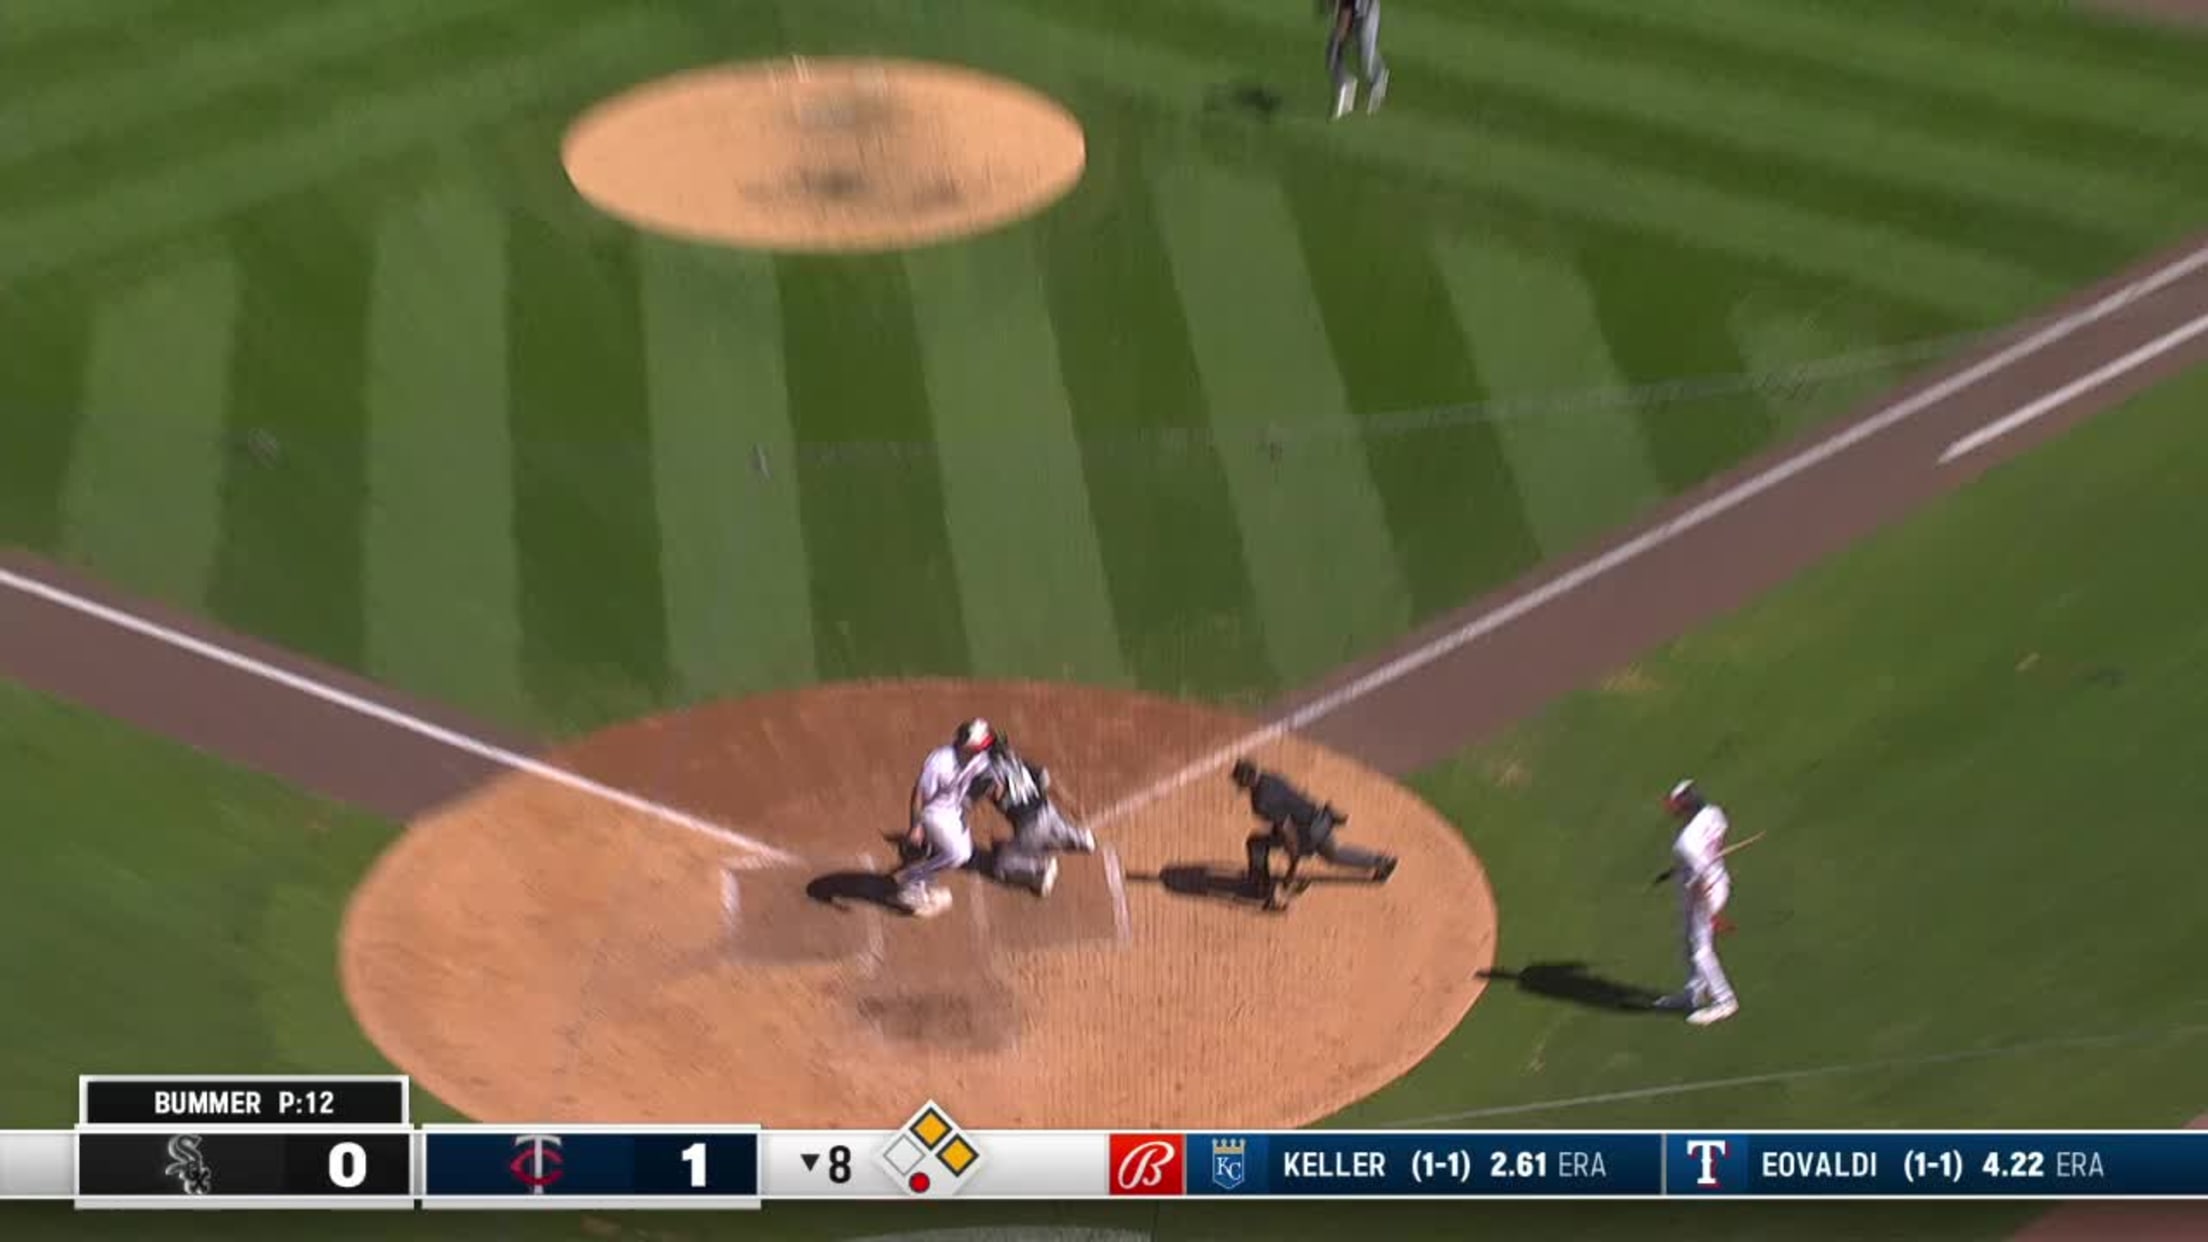 Willi Castro lines an RBI double, 04/12/2023